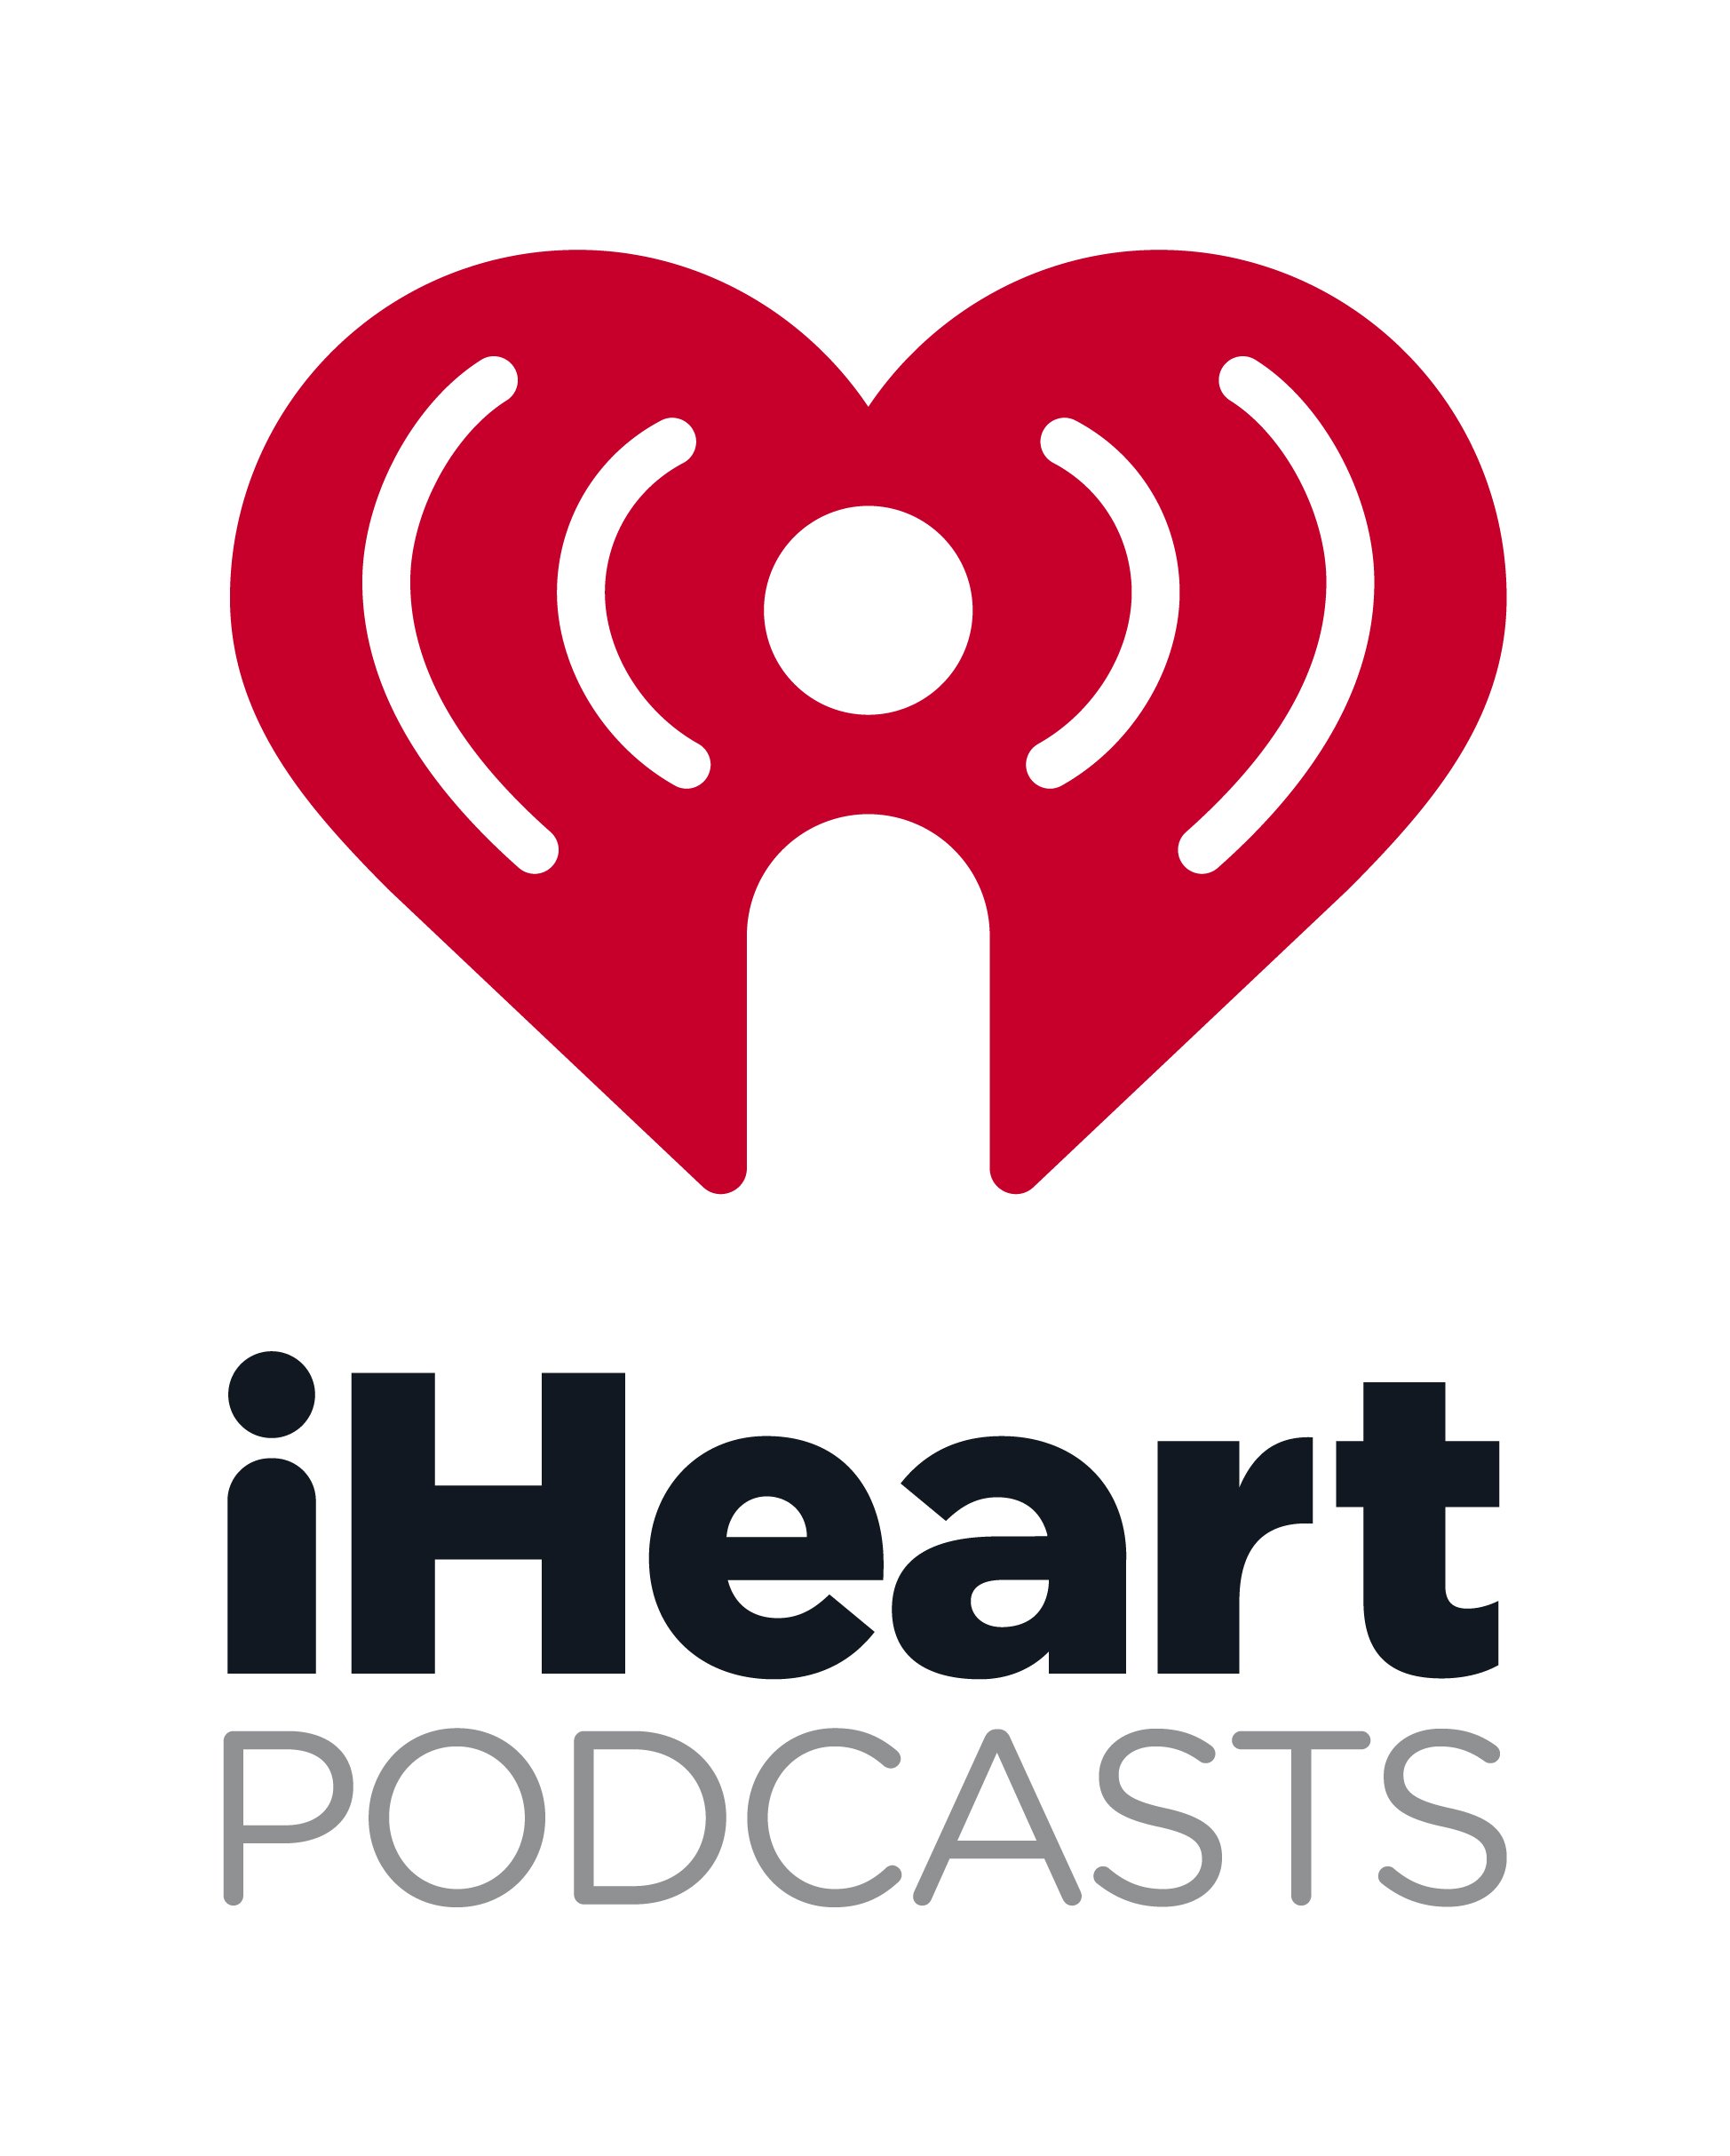 iHeartPodcasts__STK_COLOR.jpg